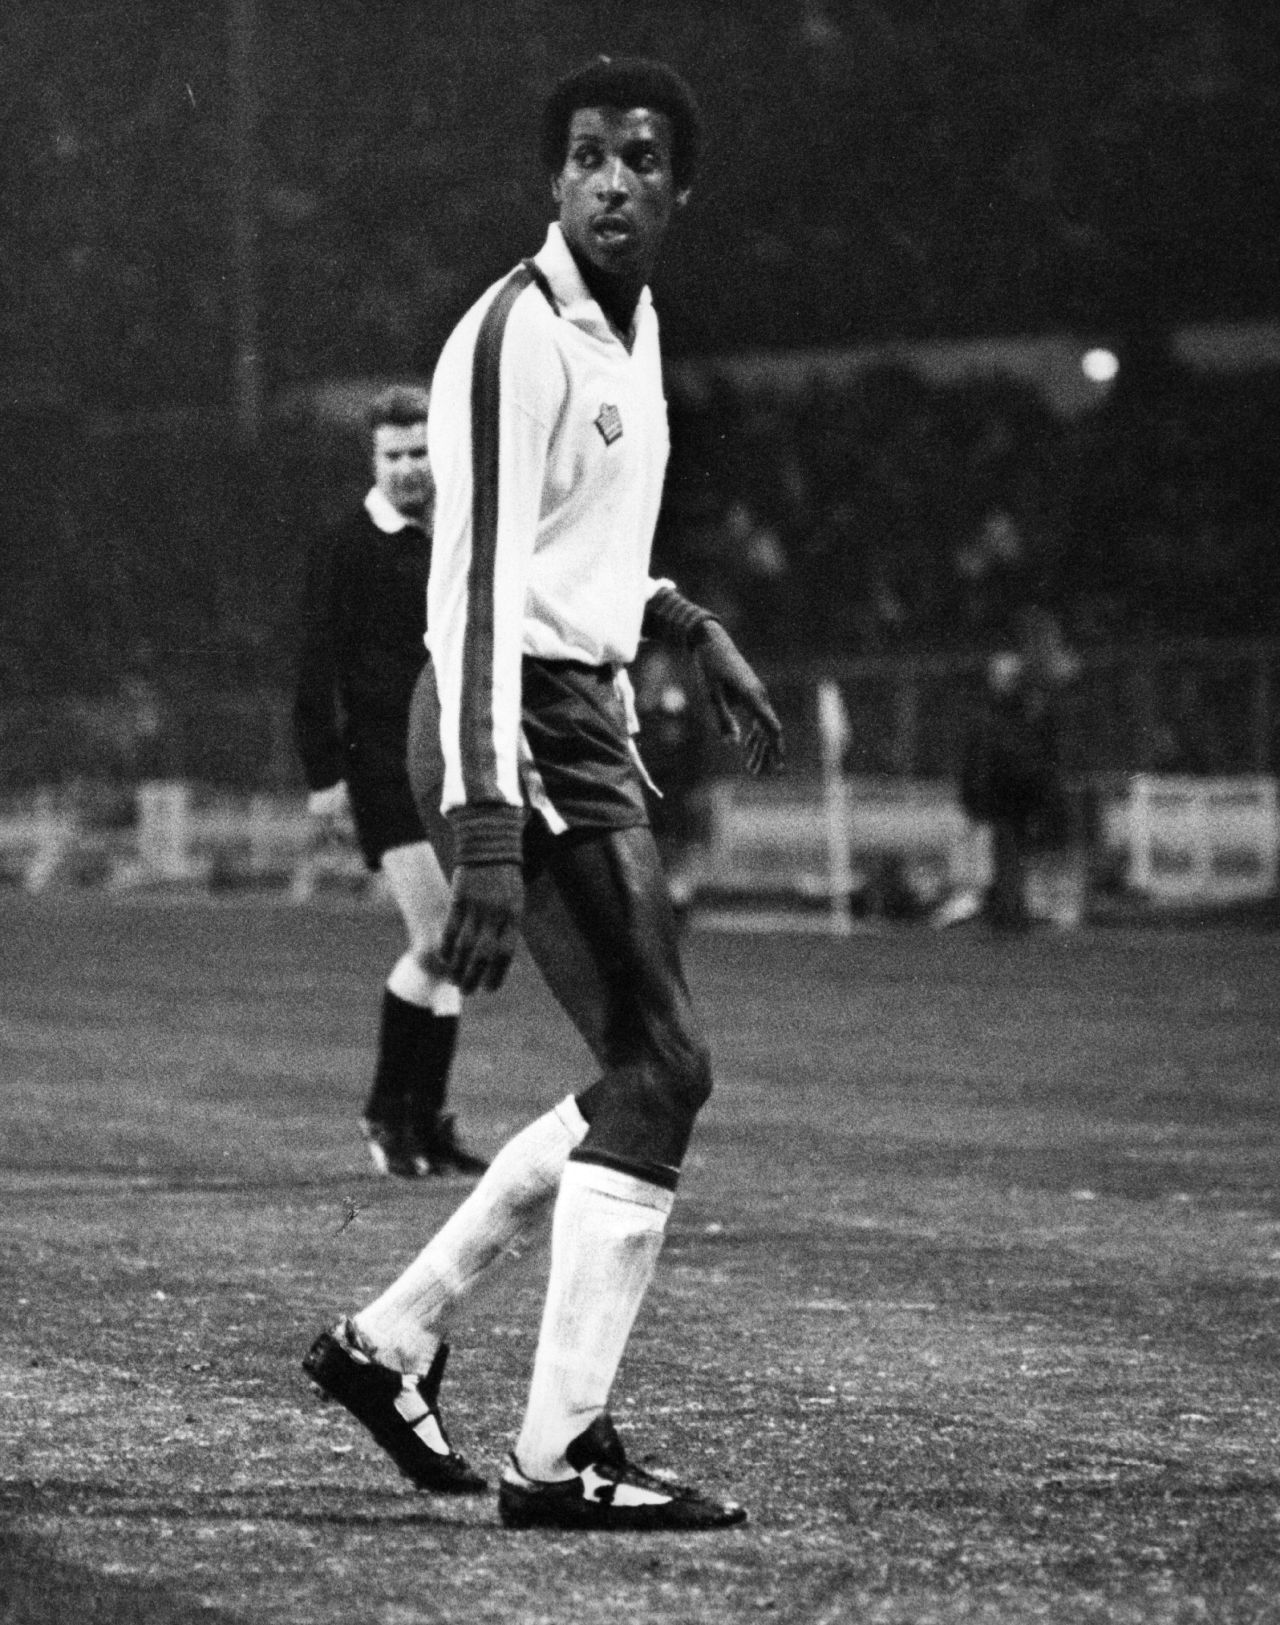 Viv Anderson won the English First Division and played a part in Nottingham Forest's two European Cup triumphs durng a glittering playing career. He is arguably most famous for becoming the first black player to represent the senior England team against Czechoslovakia at Wembley in 1978.